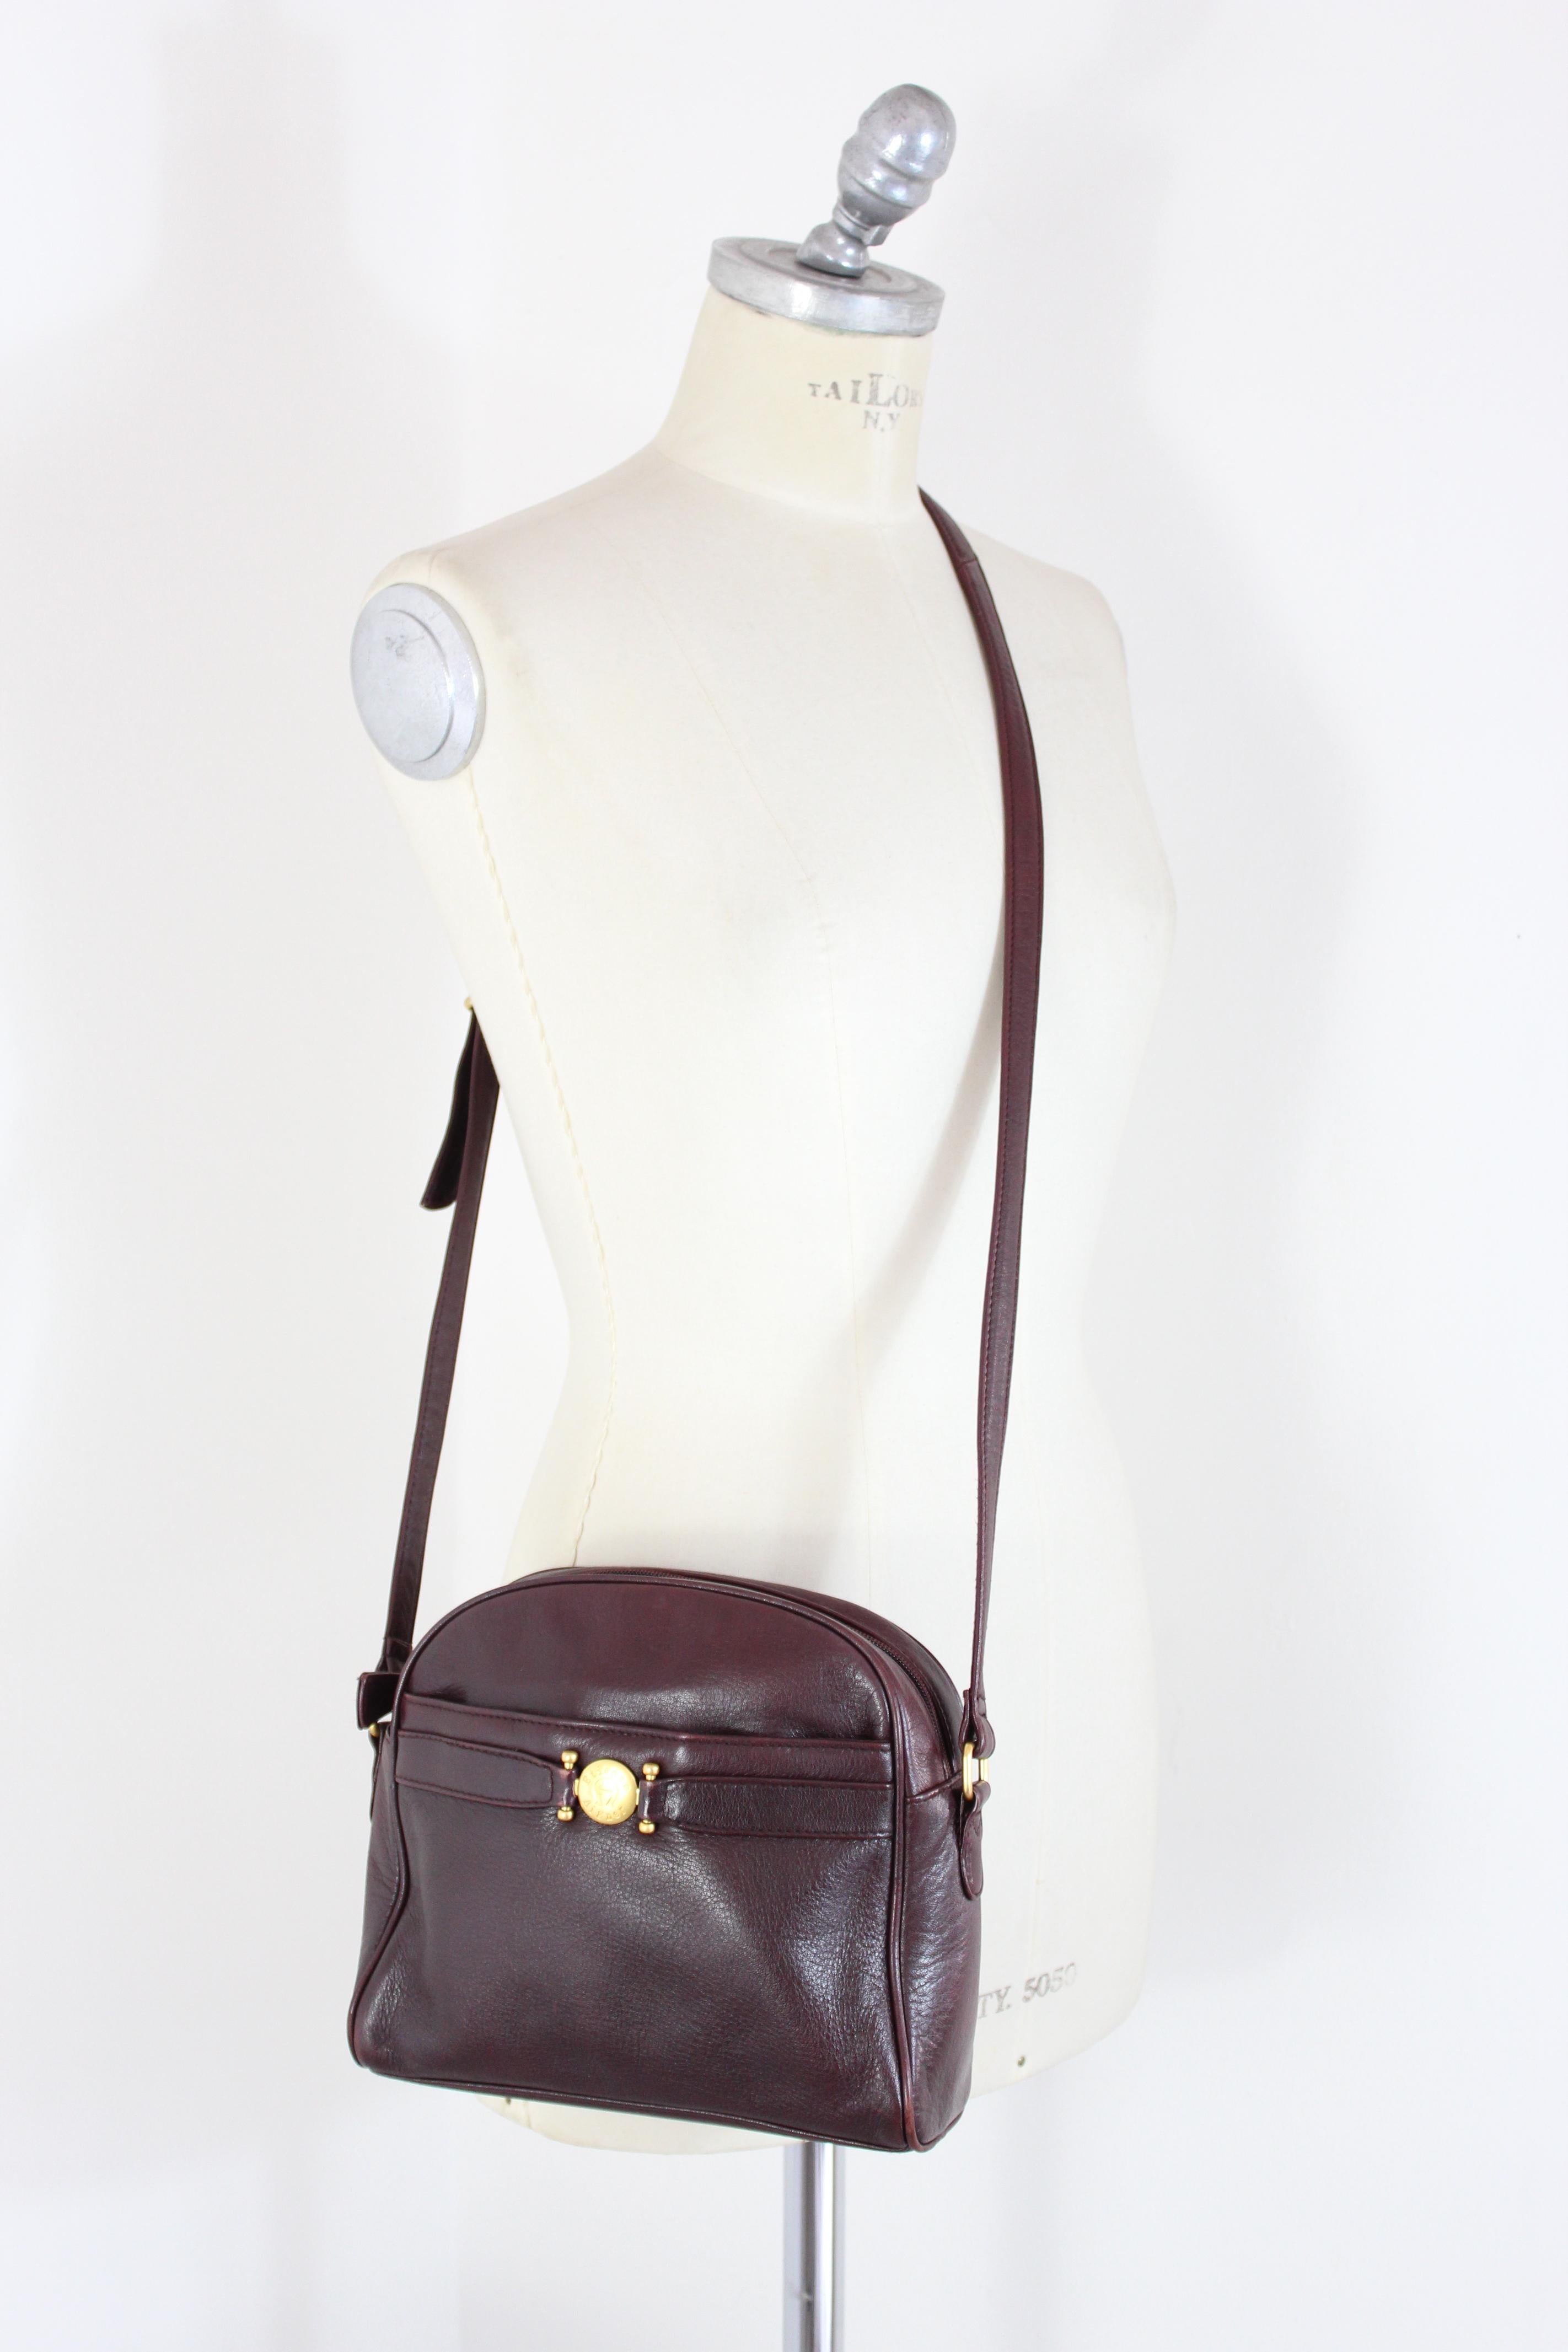 Etienne Aigner vintage 80s bag. Shoulder bag, burgundy color with gold details. Adjustable shoulder strap, external and internal compartments, zip closure. 100% leather fabric. Made in France. Very good vintage condition, some small signs of wear